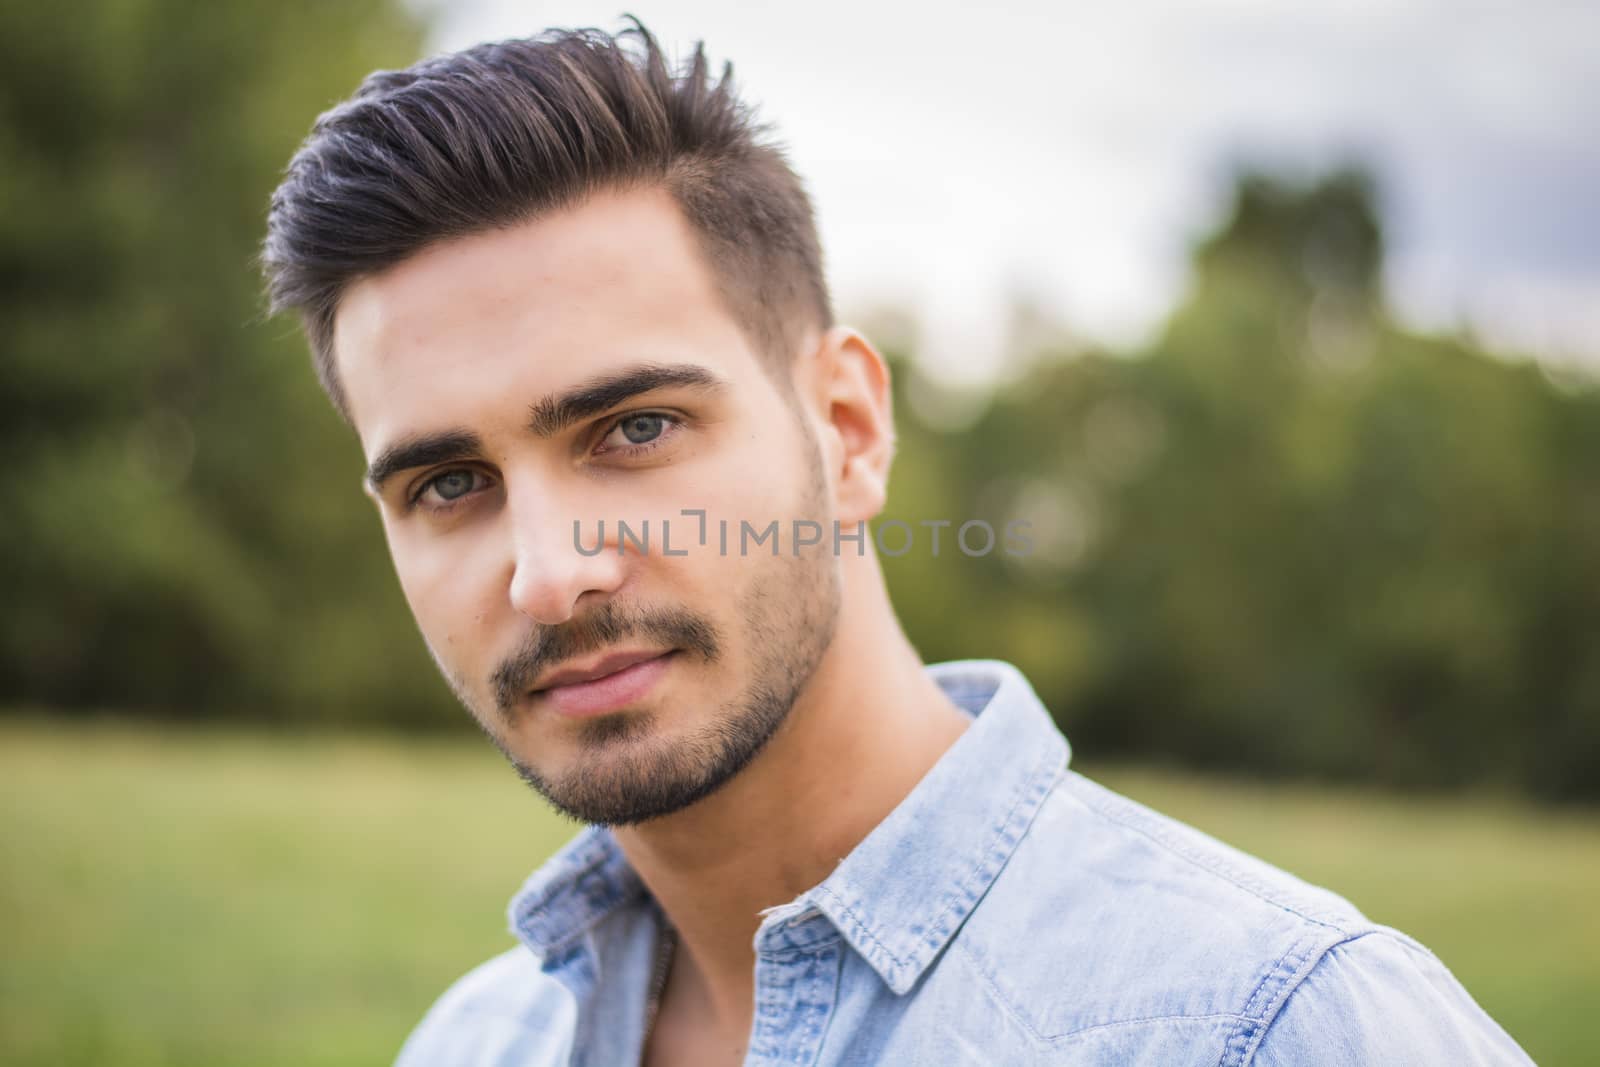 Handsome young man at countryside, in front of field or grassland, wearing shirt, looking away to a side